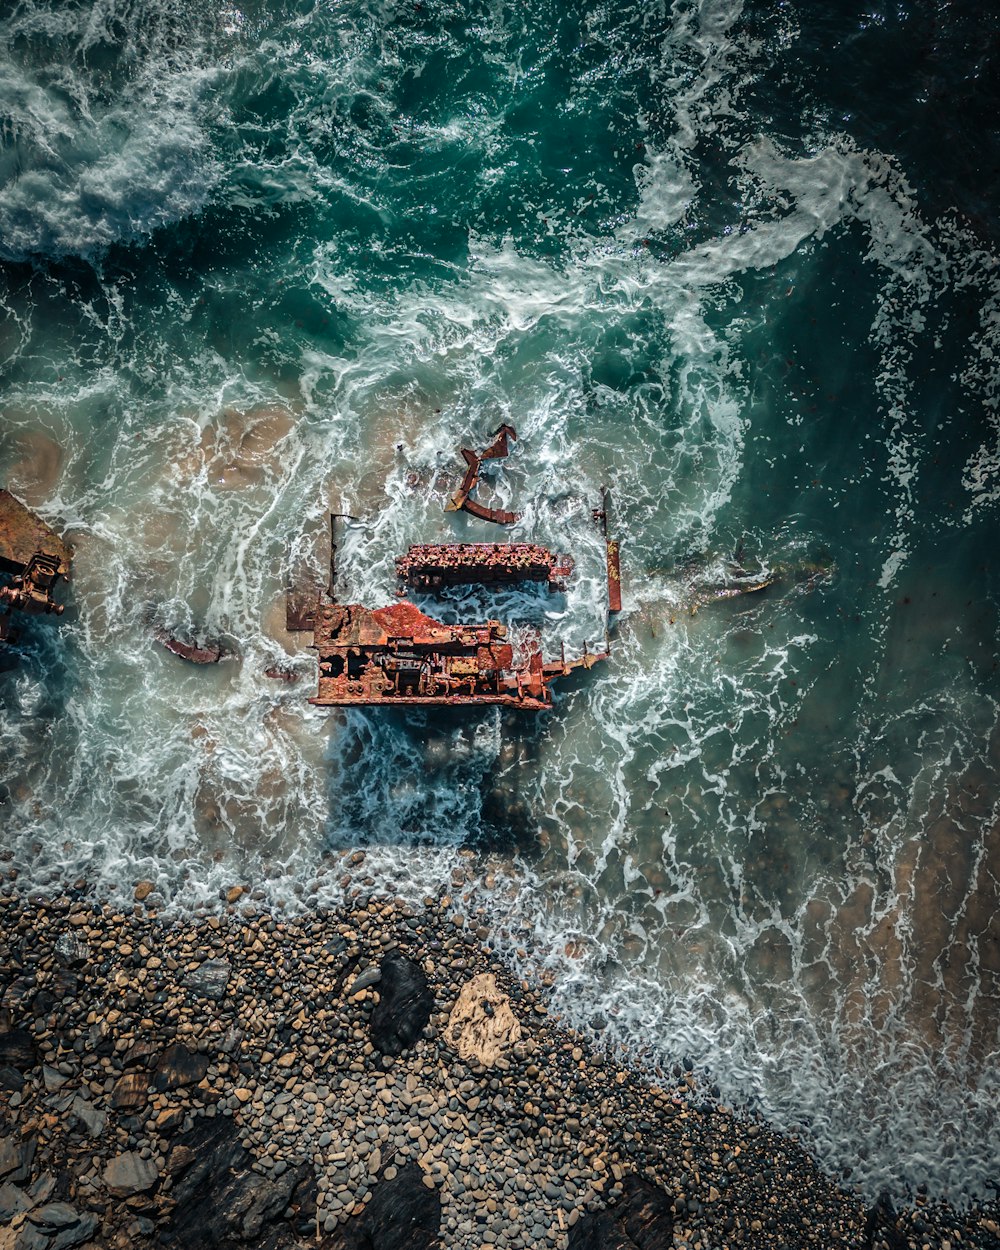 an aerial view of a rusty boat in the ocean